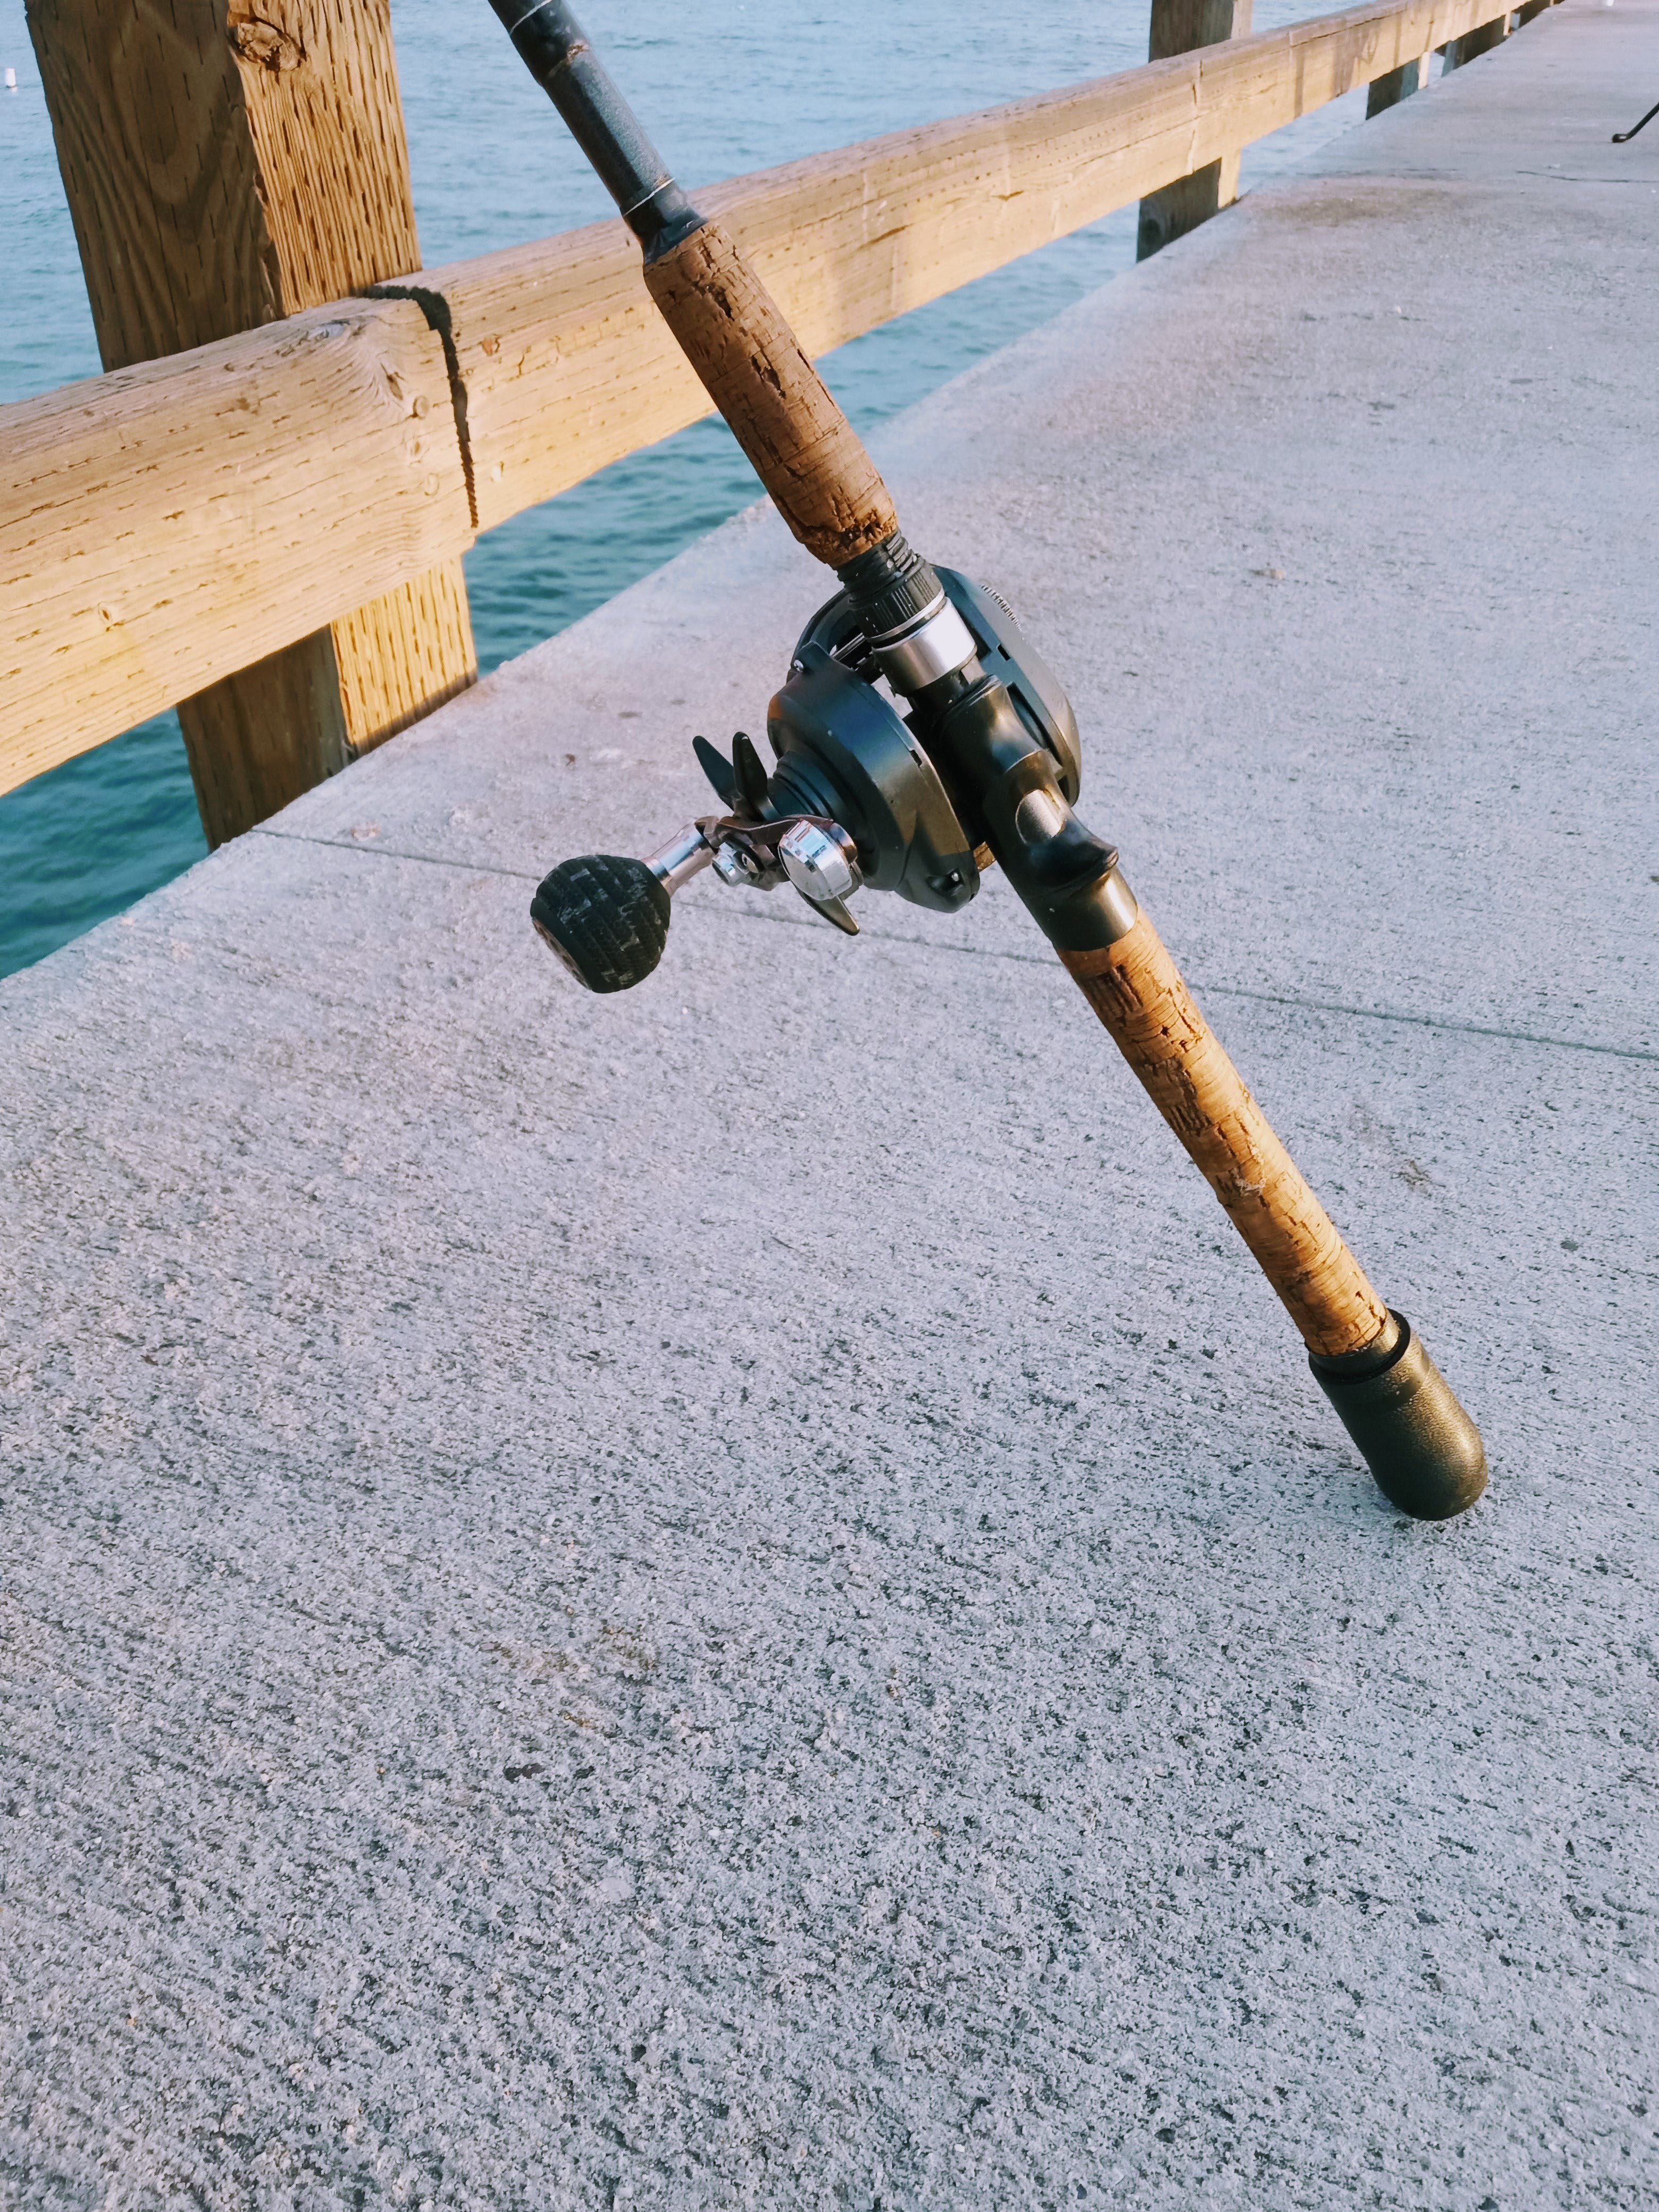 Balboa Pier Fish - Balboa Pier, Newport Beach, California. Pier fishing  gear and tackle rental. Rent quality rods and reels to fish the piers in  Newport Beach, CA. Schedule a private pier